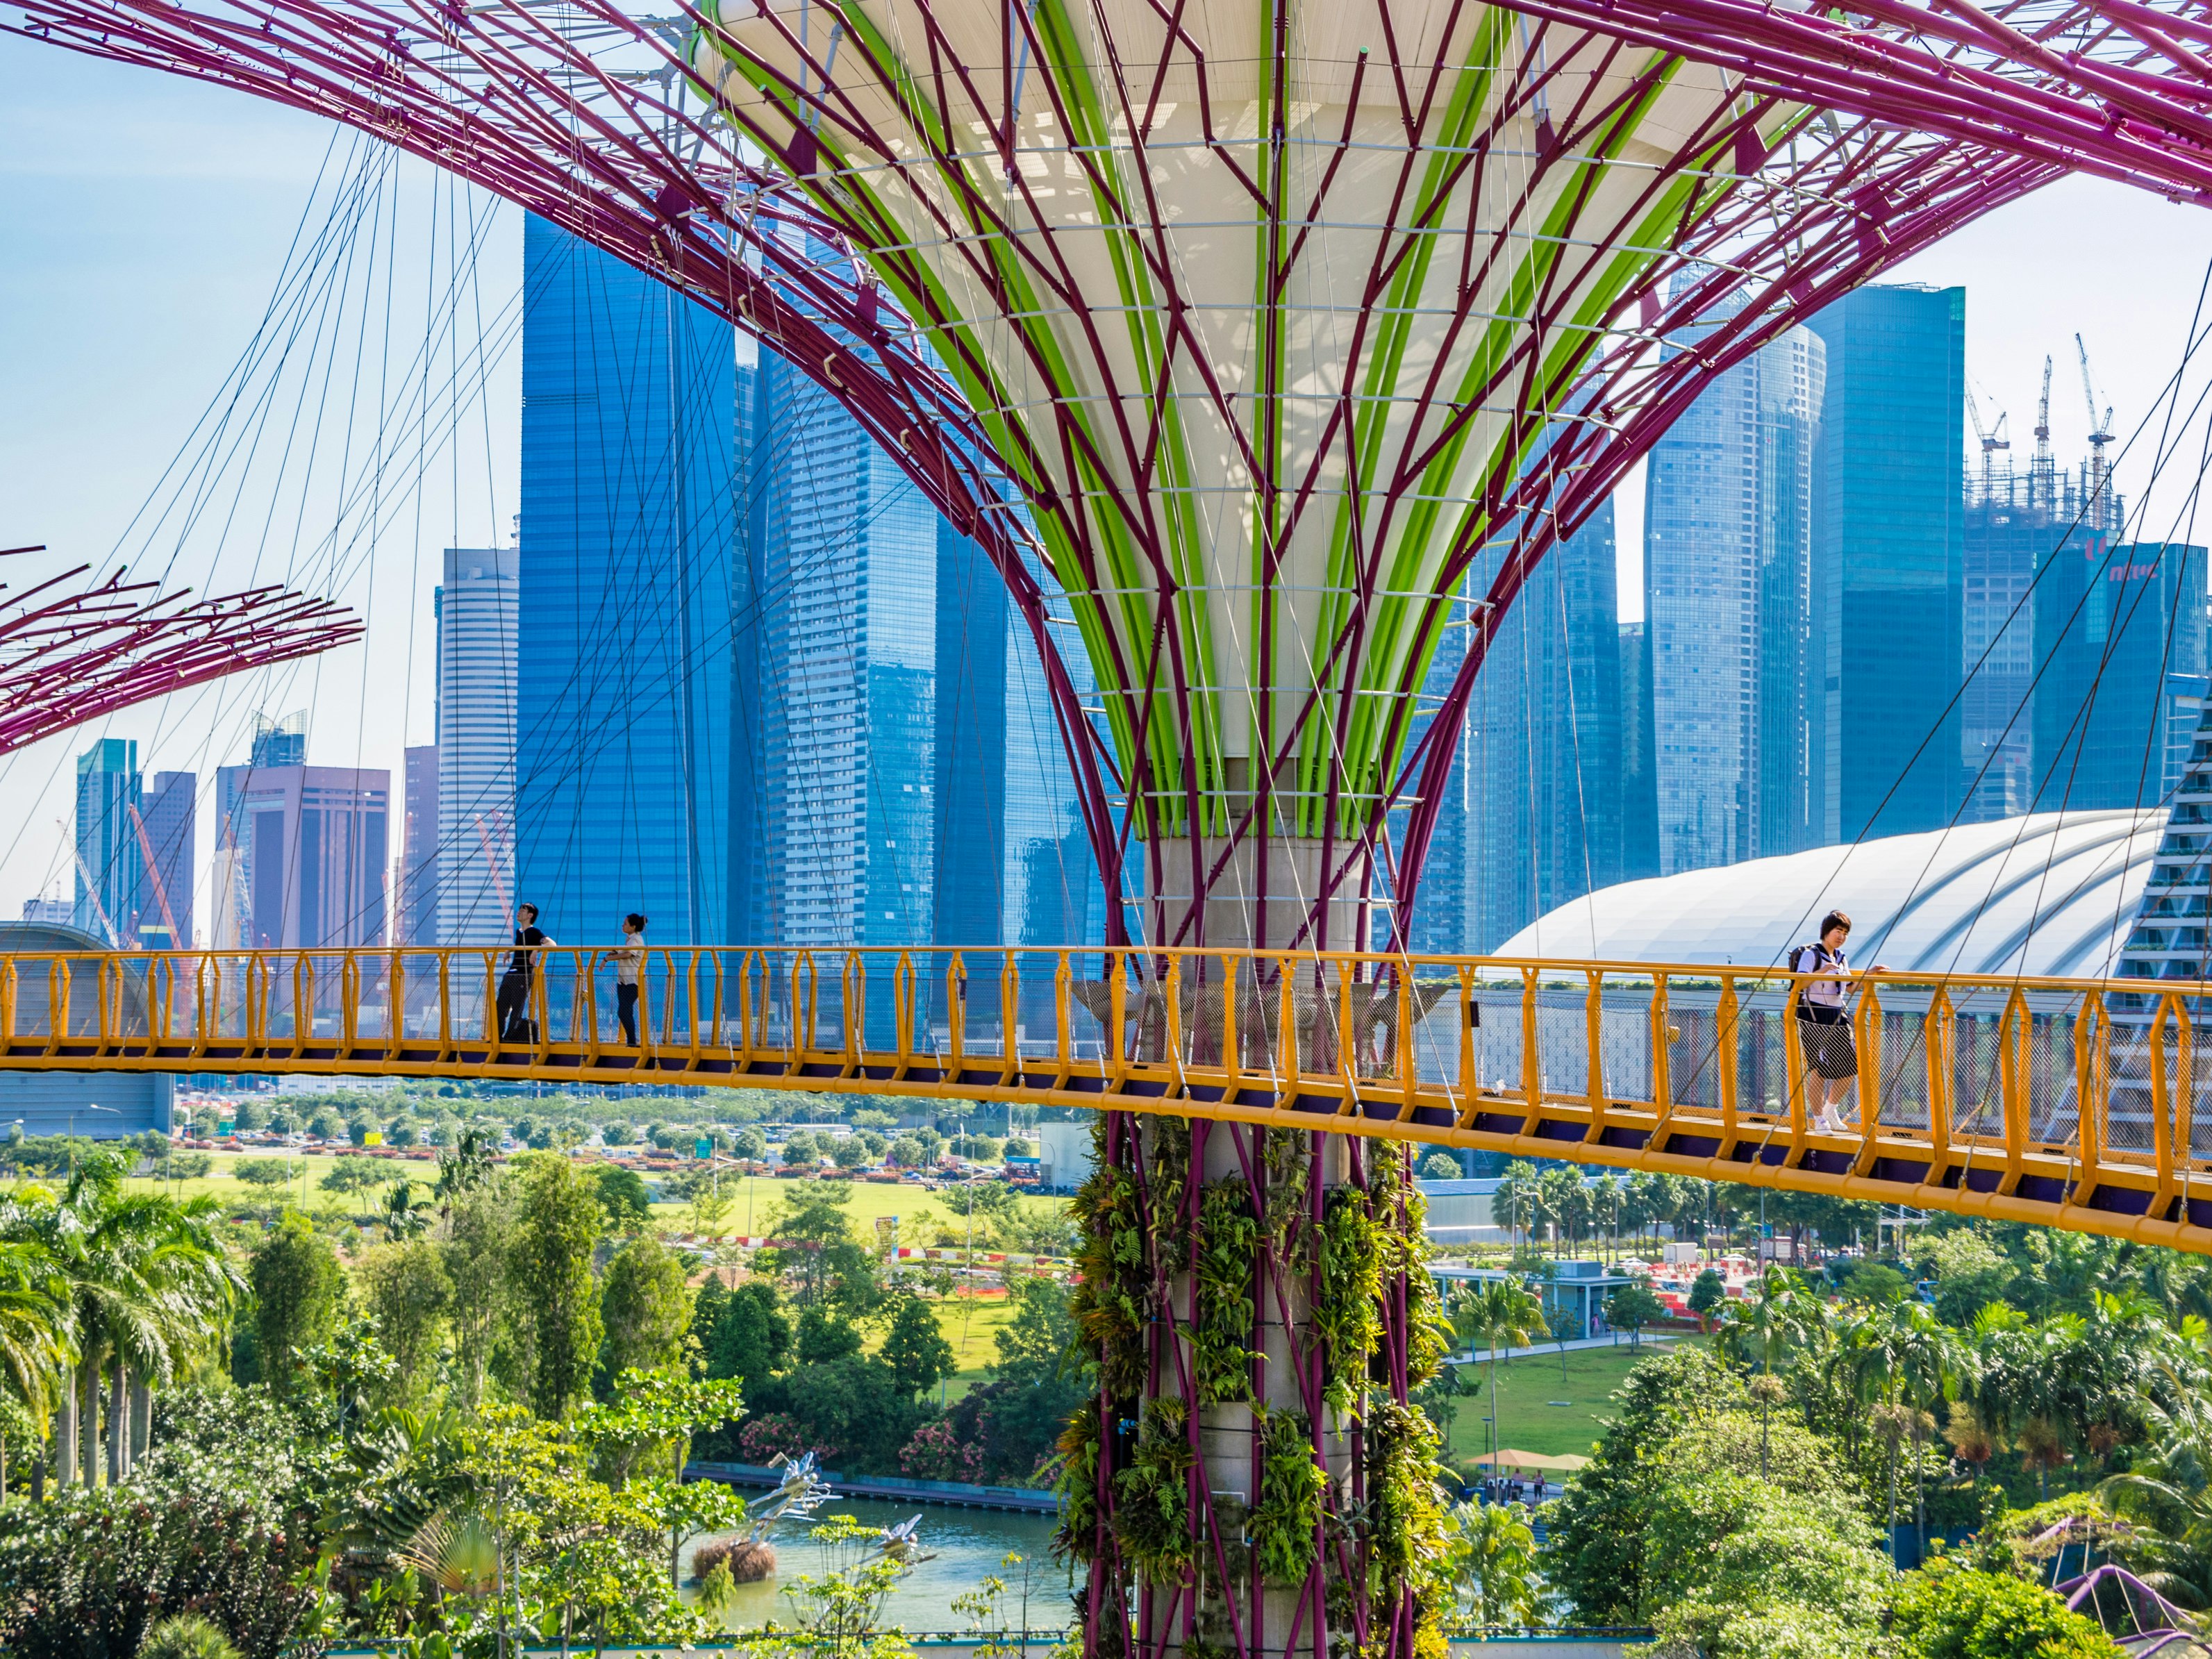 People walk along one of the hanging bridges that forms part of Singapore's futuristic Gardens by the Bay. In the background a number of glass skyscrapers are visible.